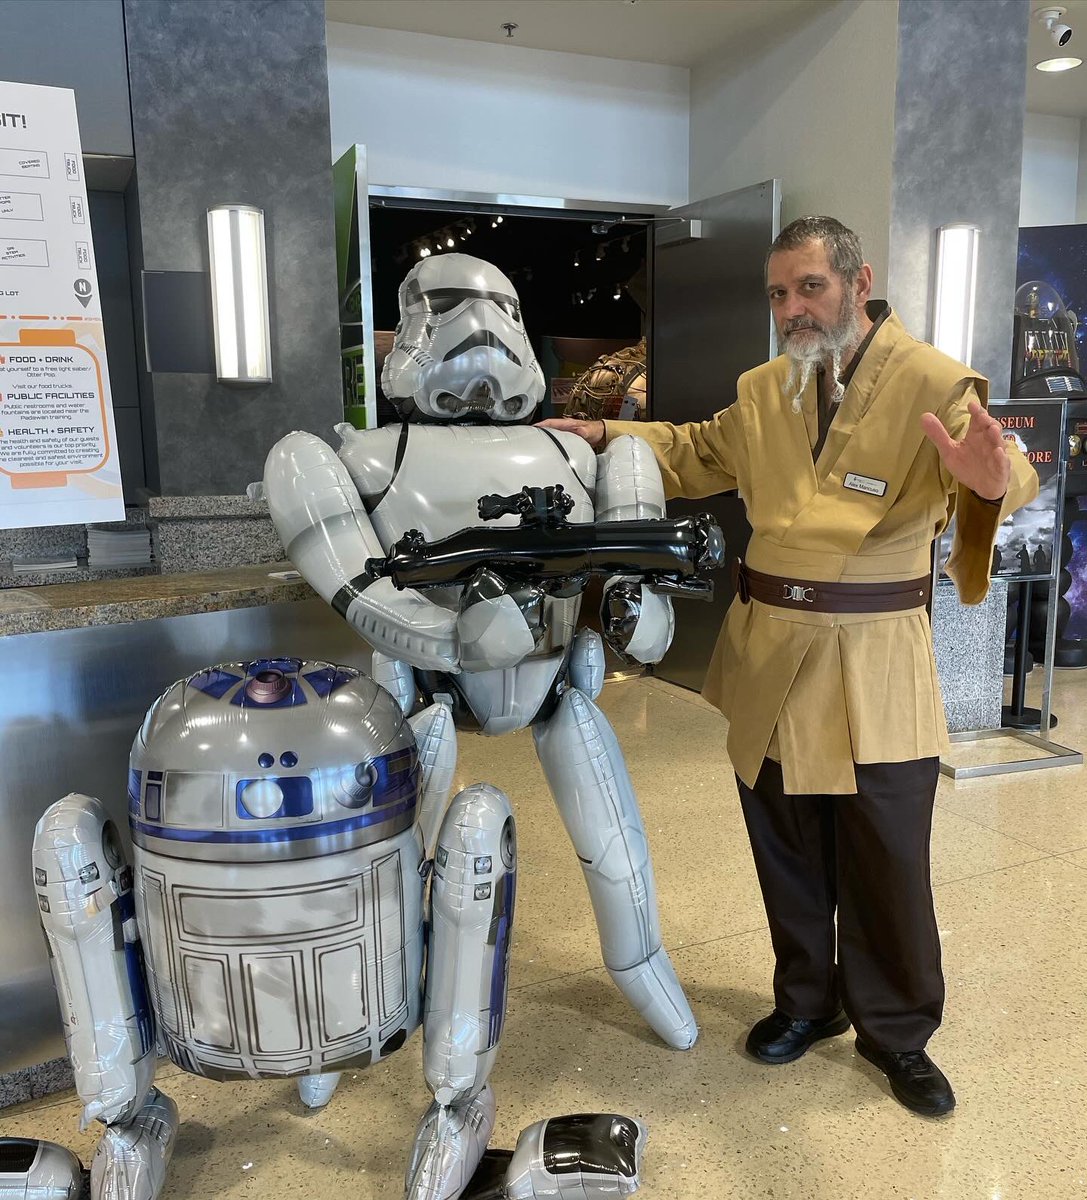 Our #Powershift team was at May The Science Be With You event yesterday at the Desert Research Institute in Las Vegas celebrating science, STEM and Star Wars! 💫 The team had a great time connecting with the community. 

#MayTheFourthBeWithYou #DRI #LasVegas #NVEnergy